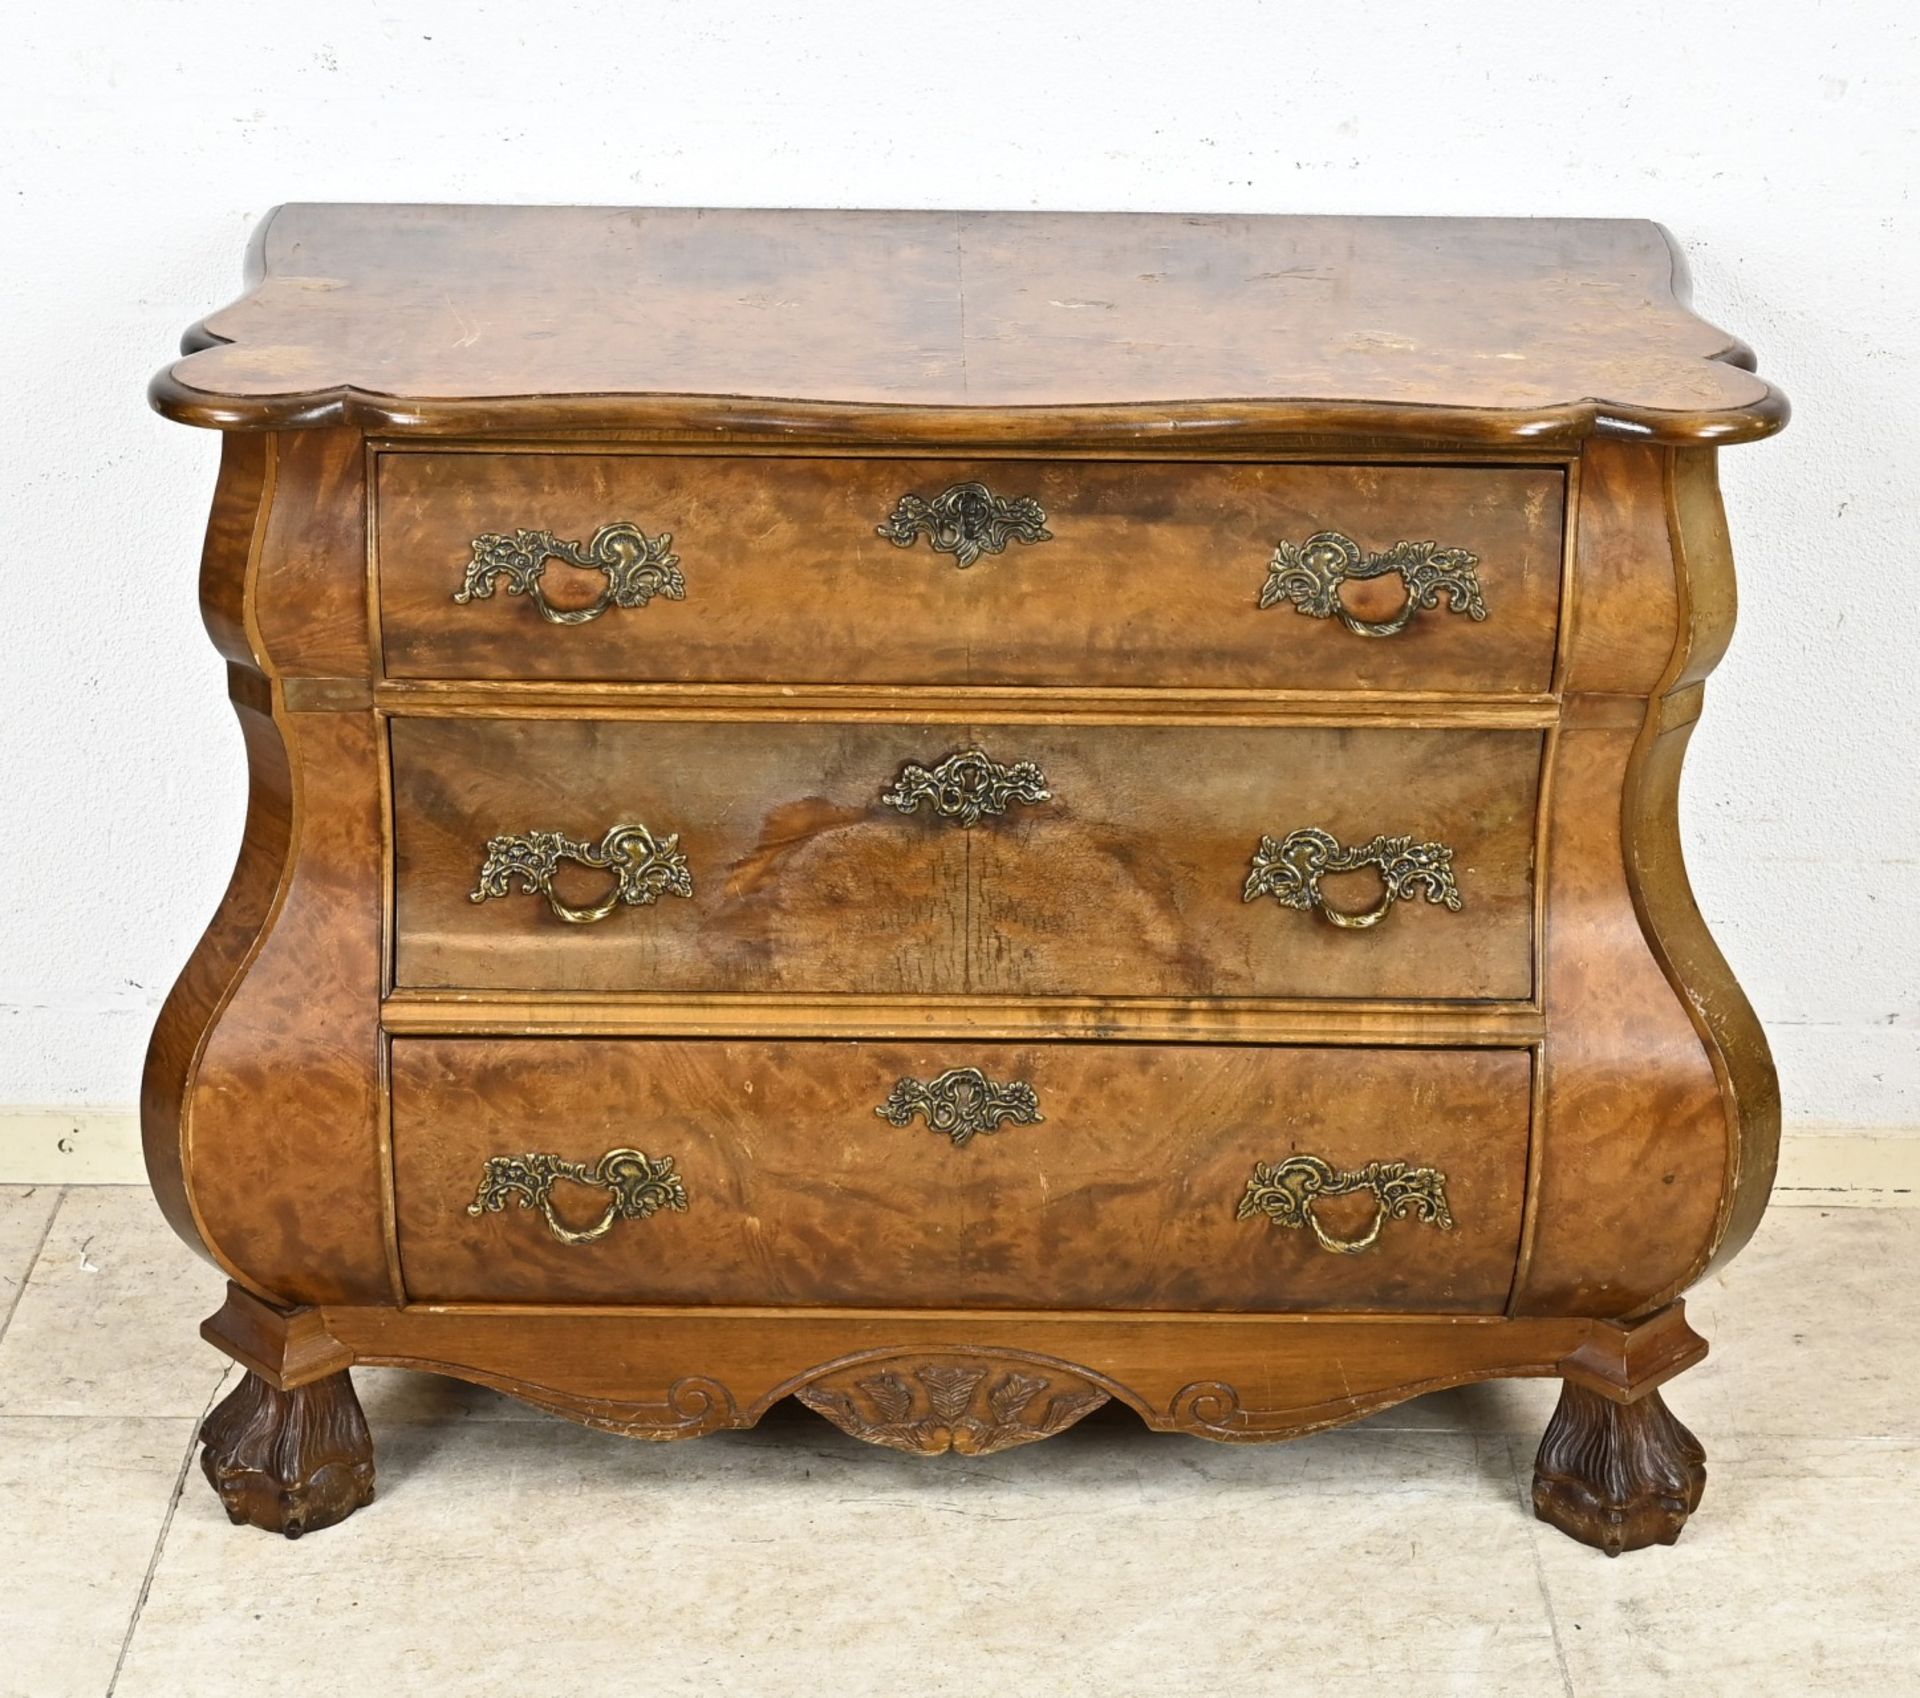 Burr walnut chest of drawers in baroque style